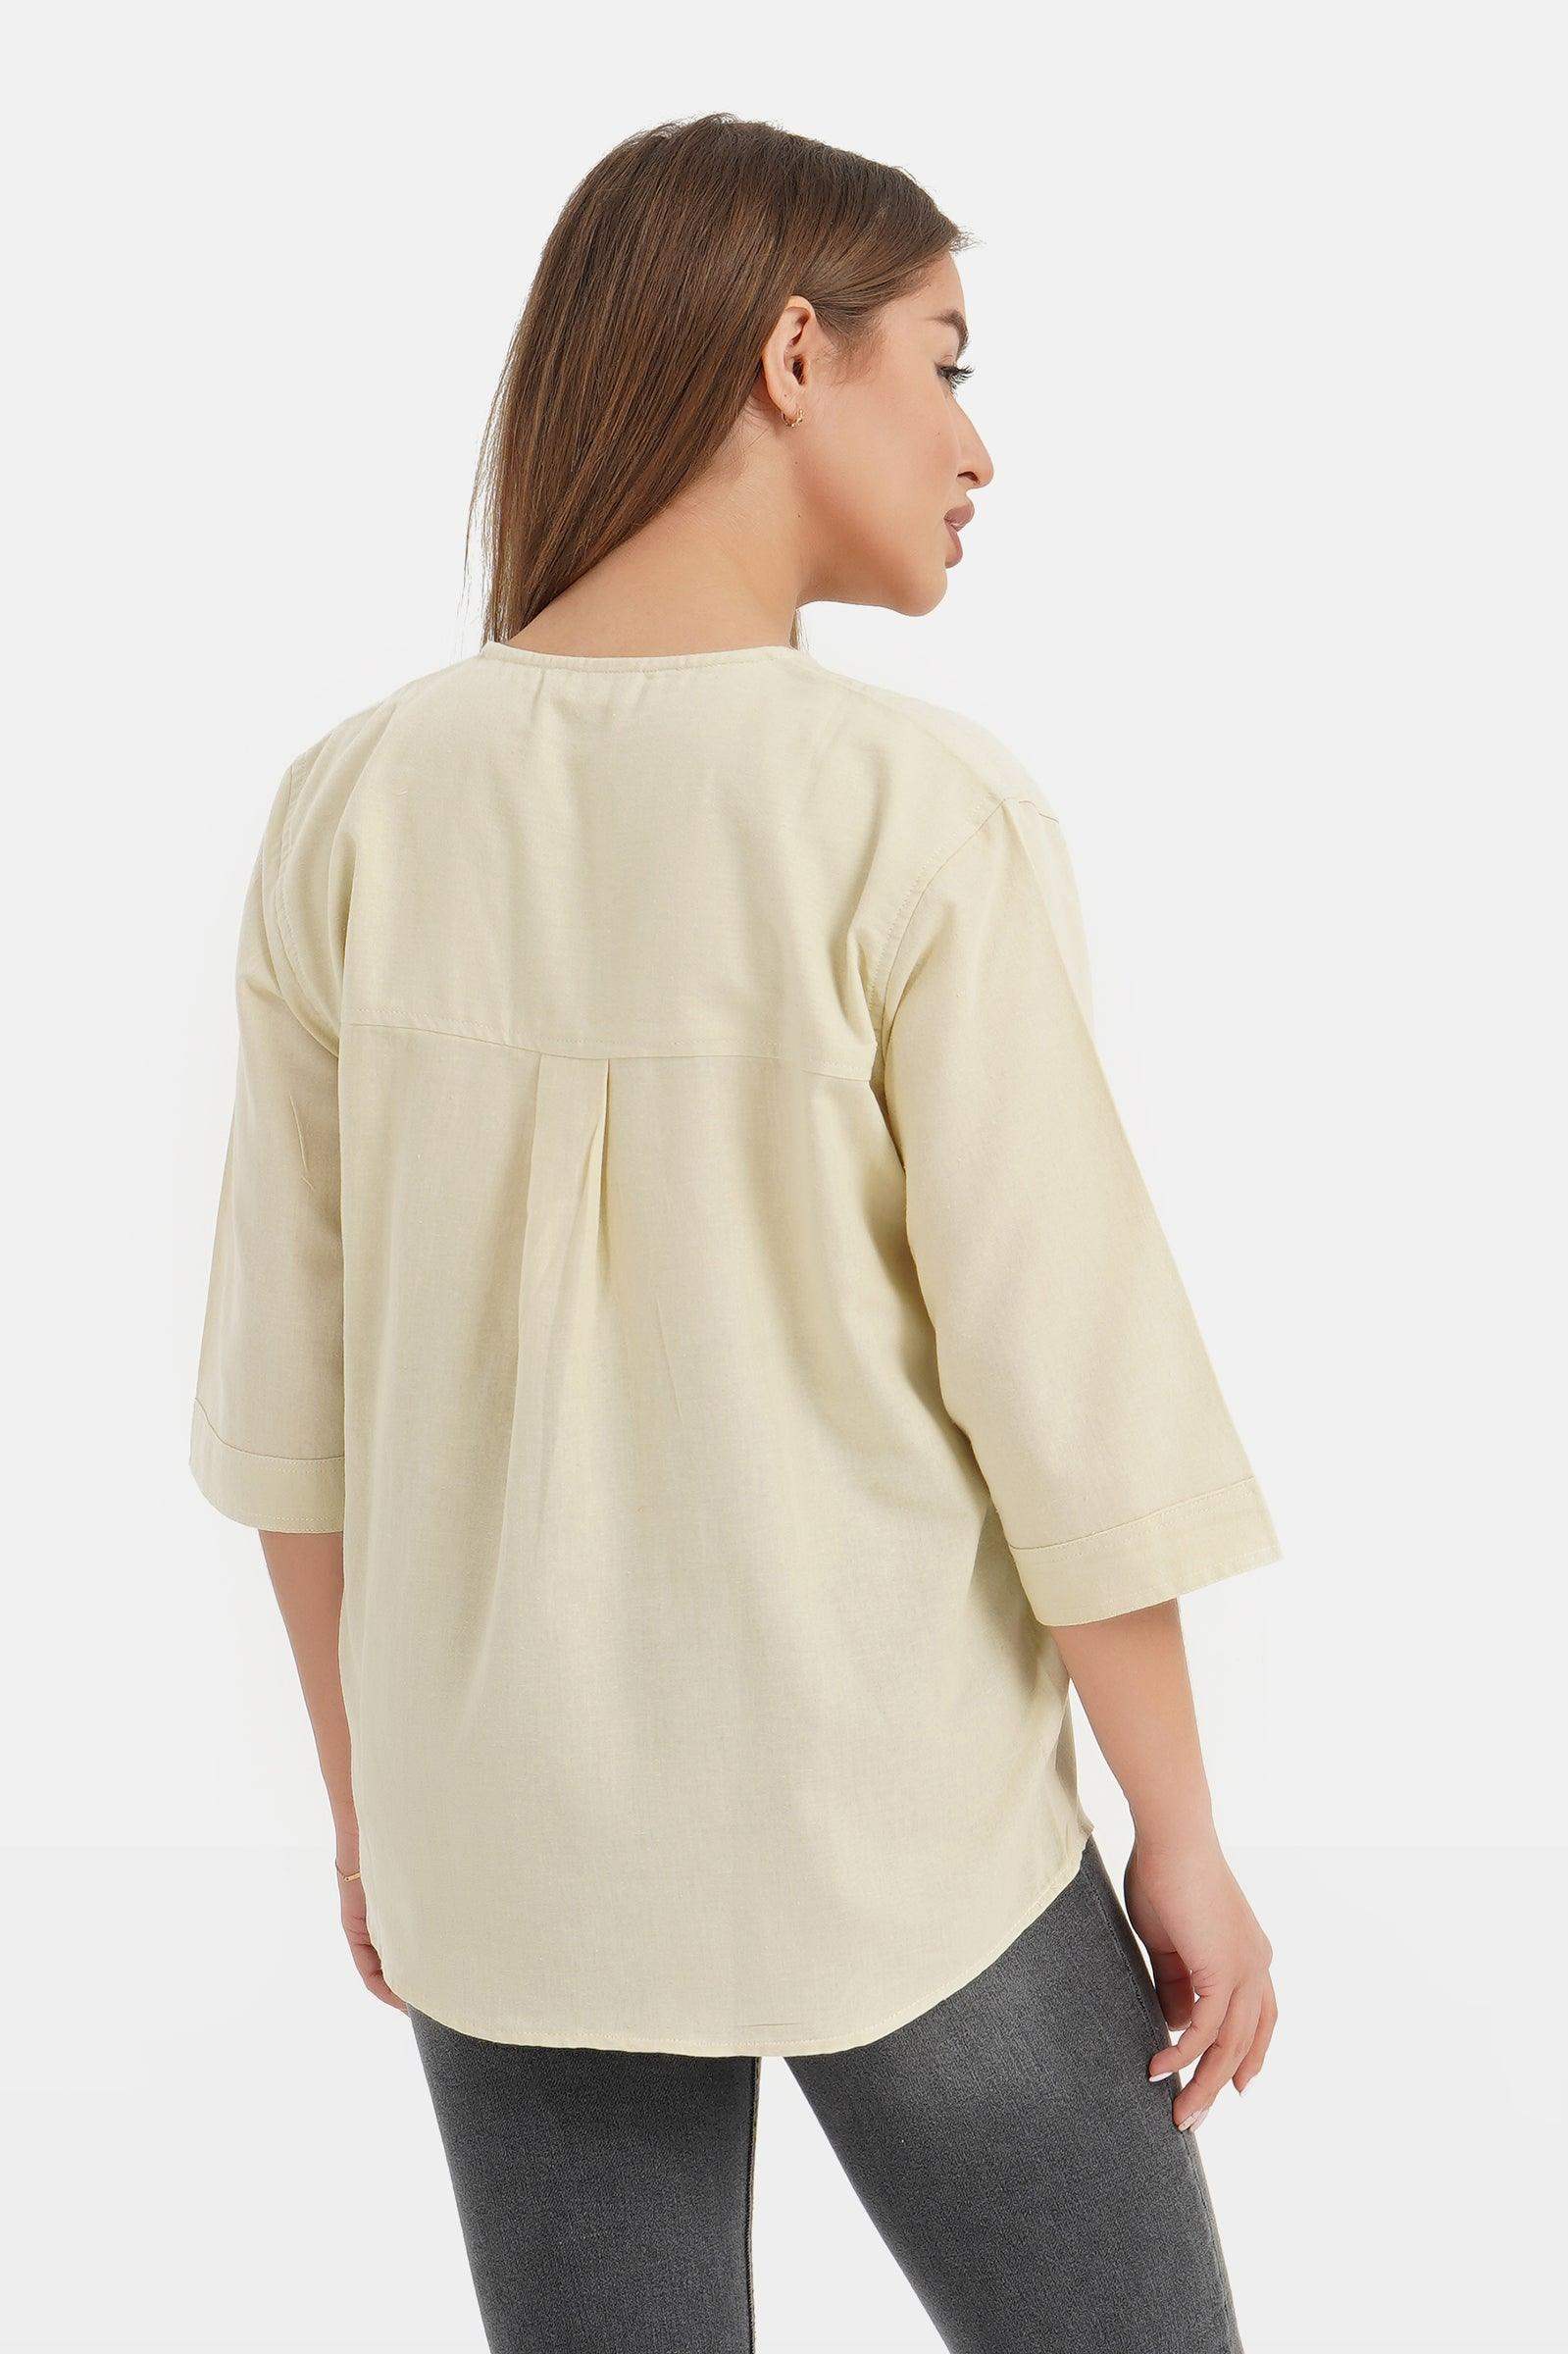 Solid Blouse with 3/4 Sleeves - Carina - كارينا